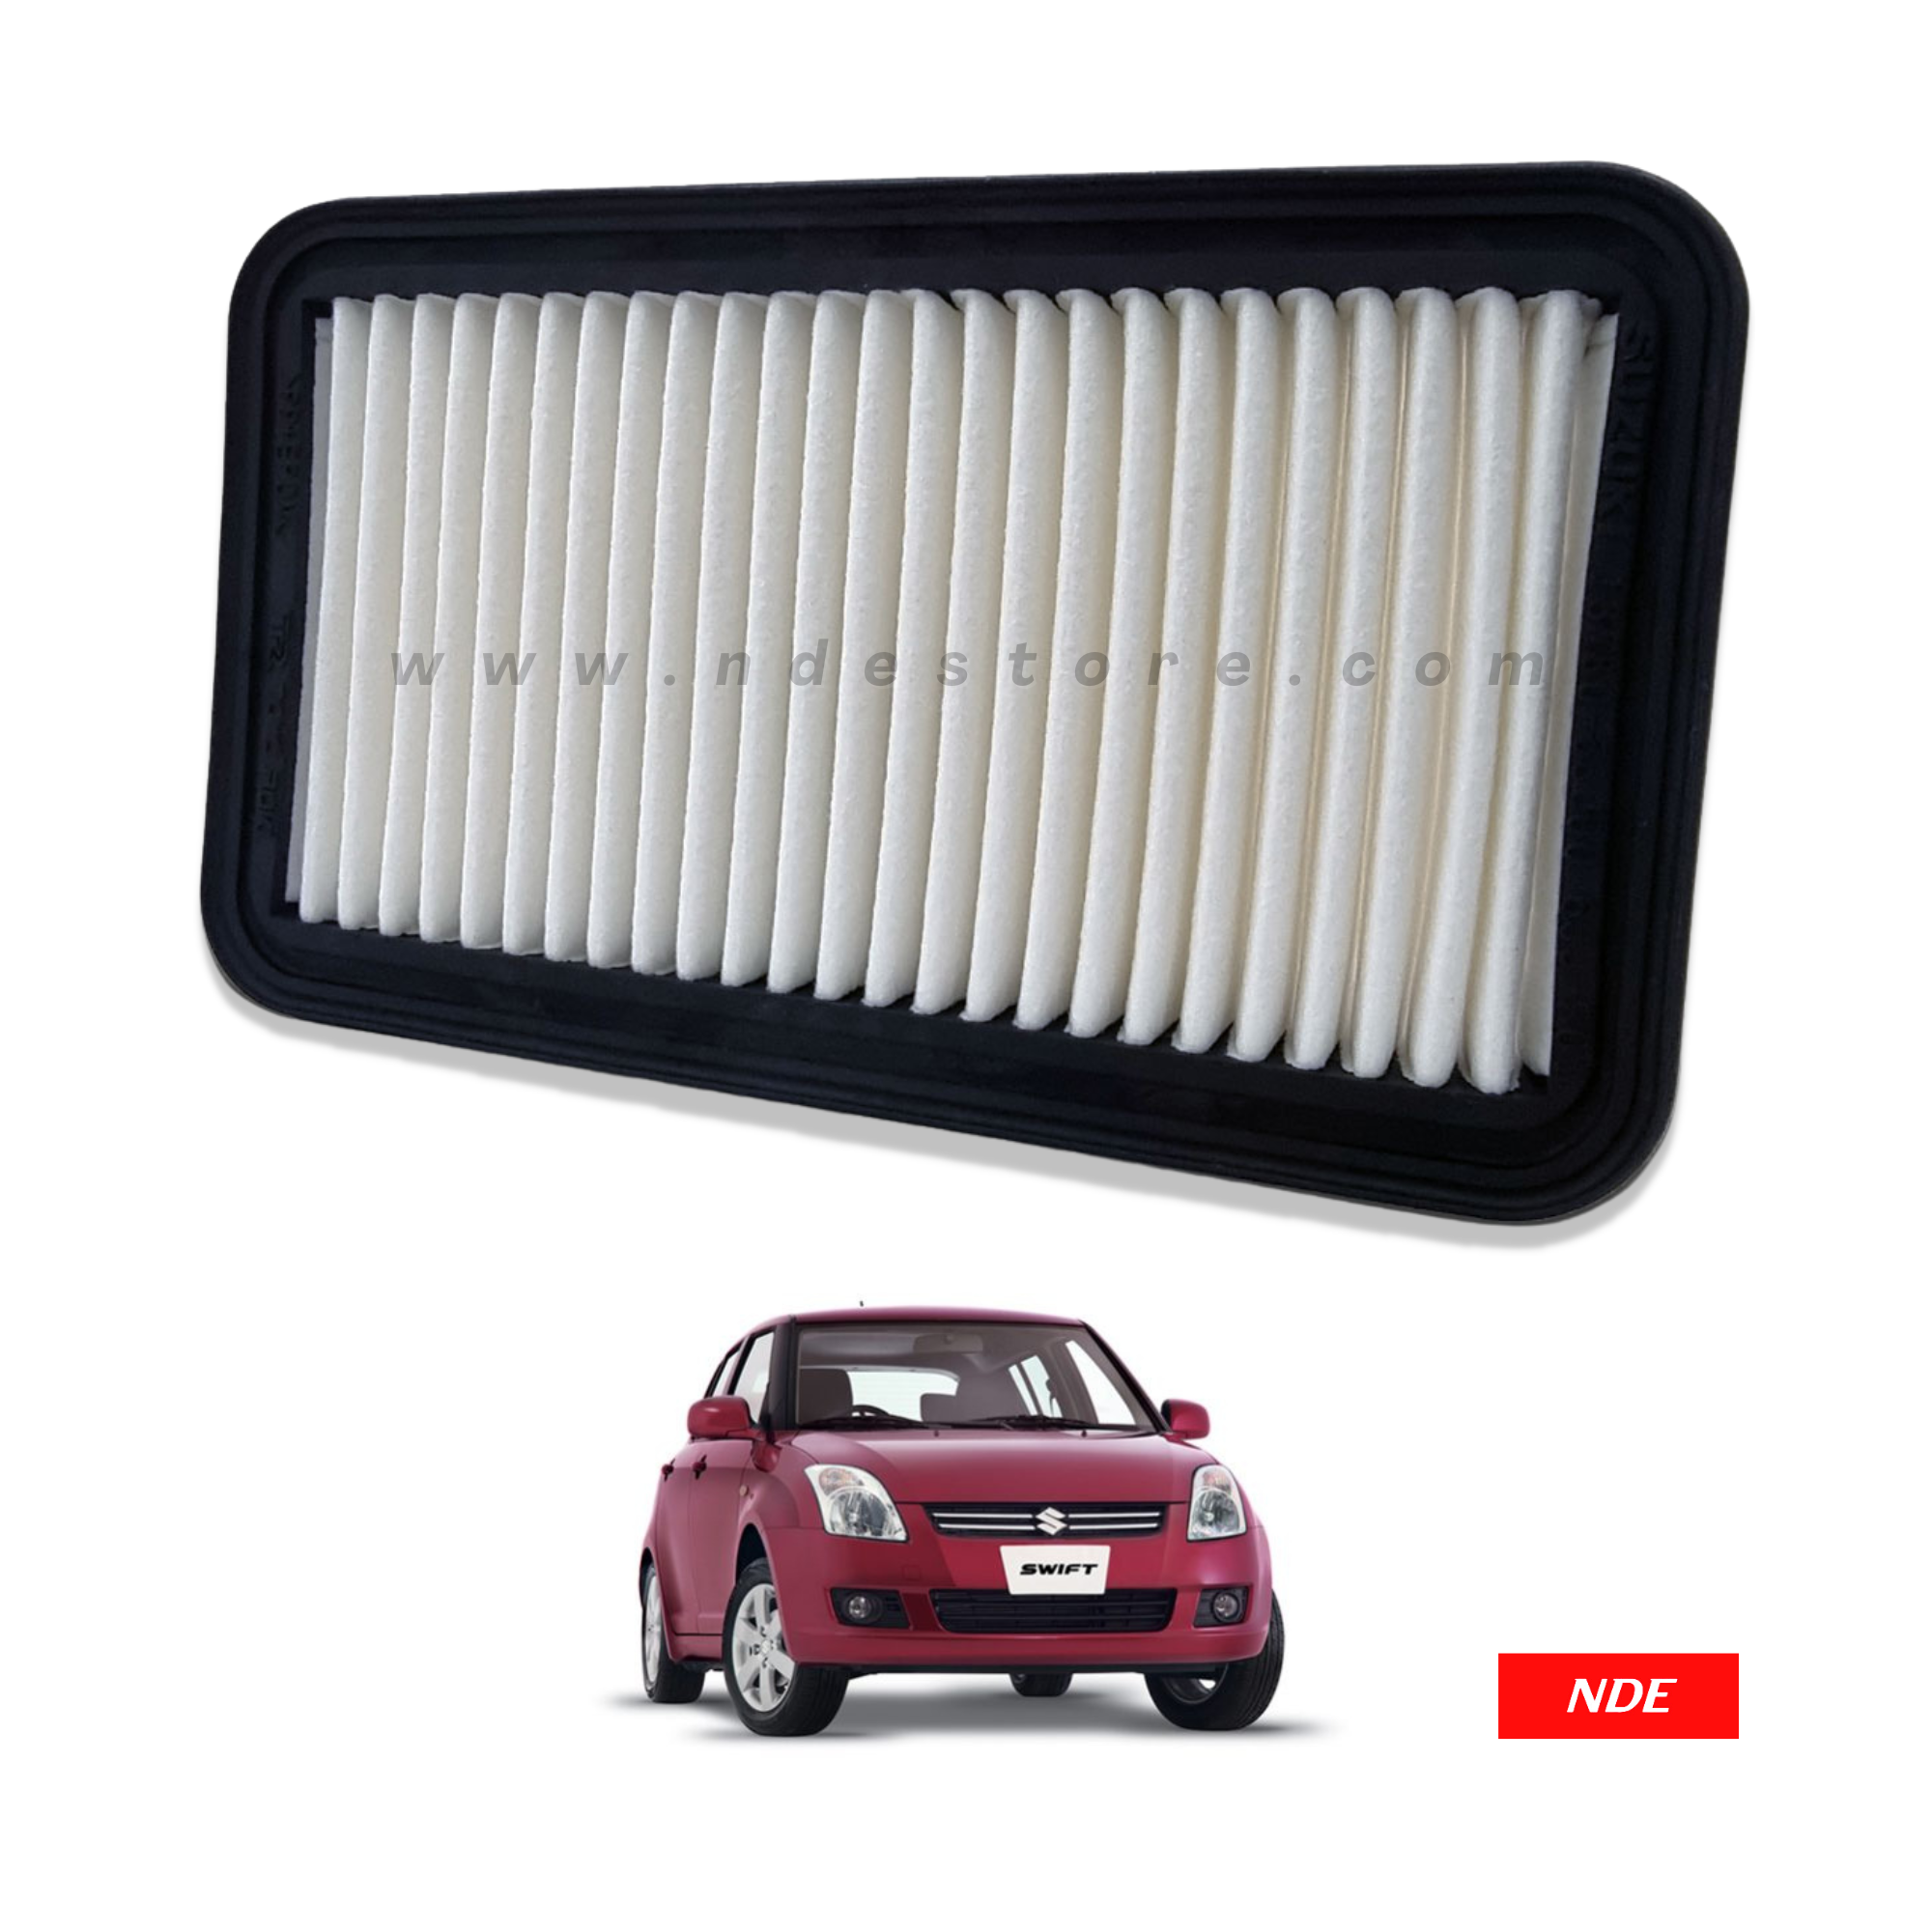 AIR FILTER ELEMENT SUB ASSY FOR SUZUKI SWIFT (IMPORTED)